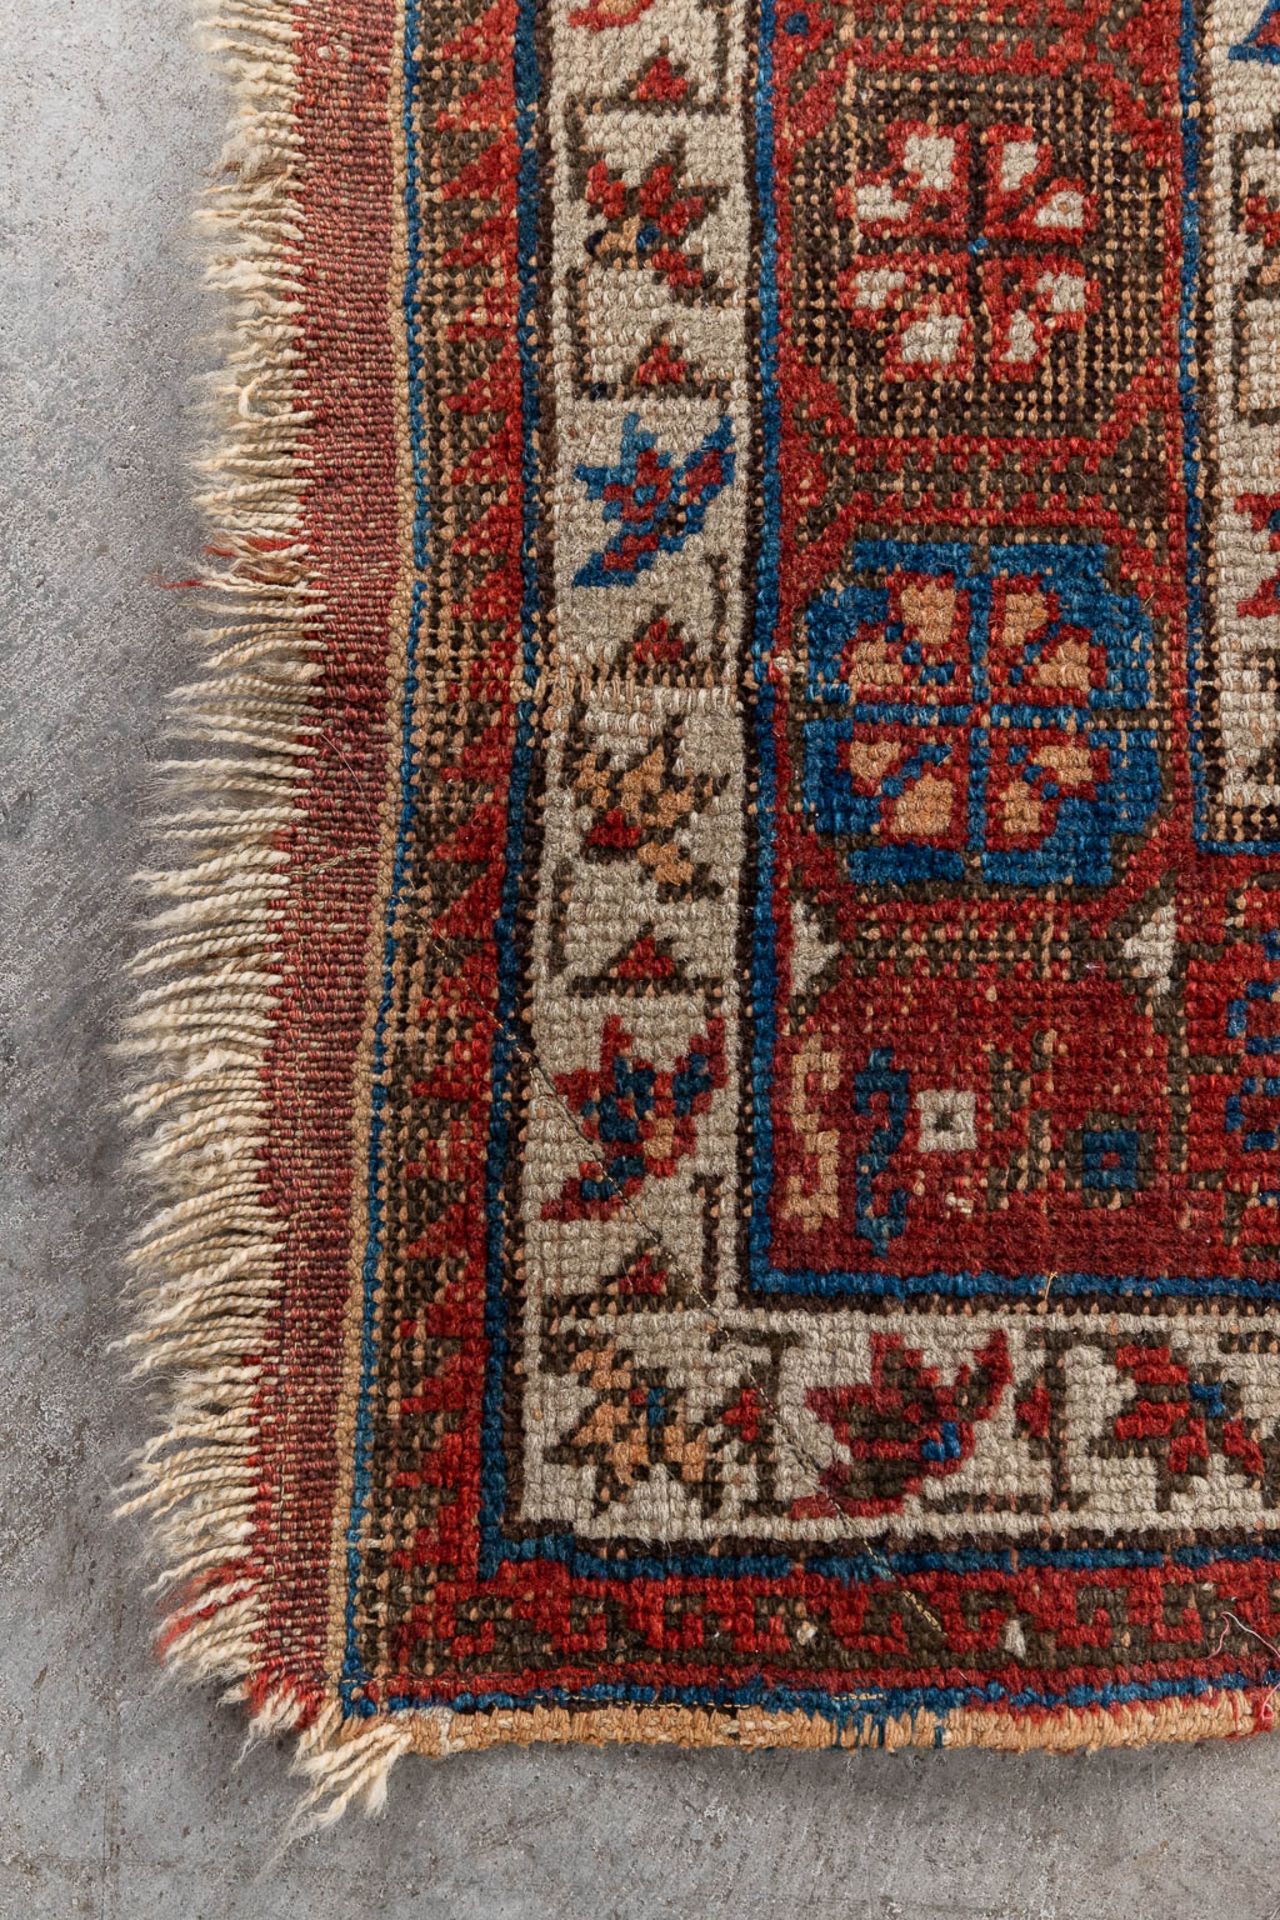 A collection of 2 Oriental hand-made carpets. Probably Caucasian. (L: 277 x W: 115 cm) - Image 11 of 12